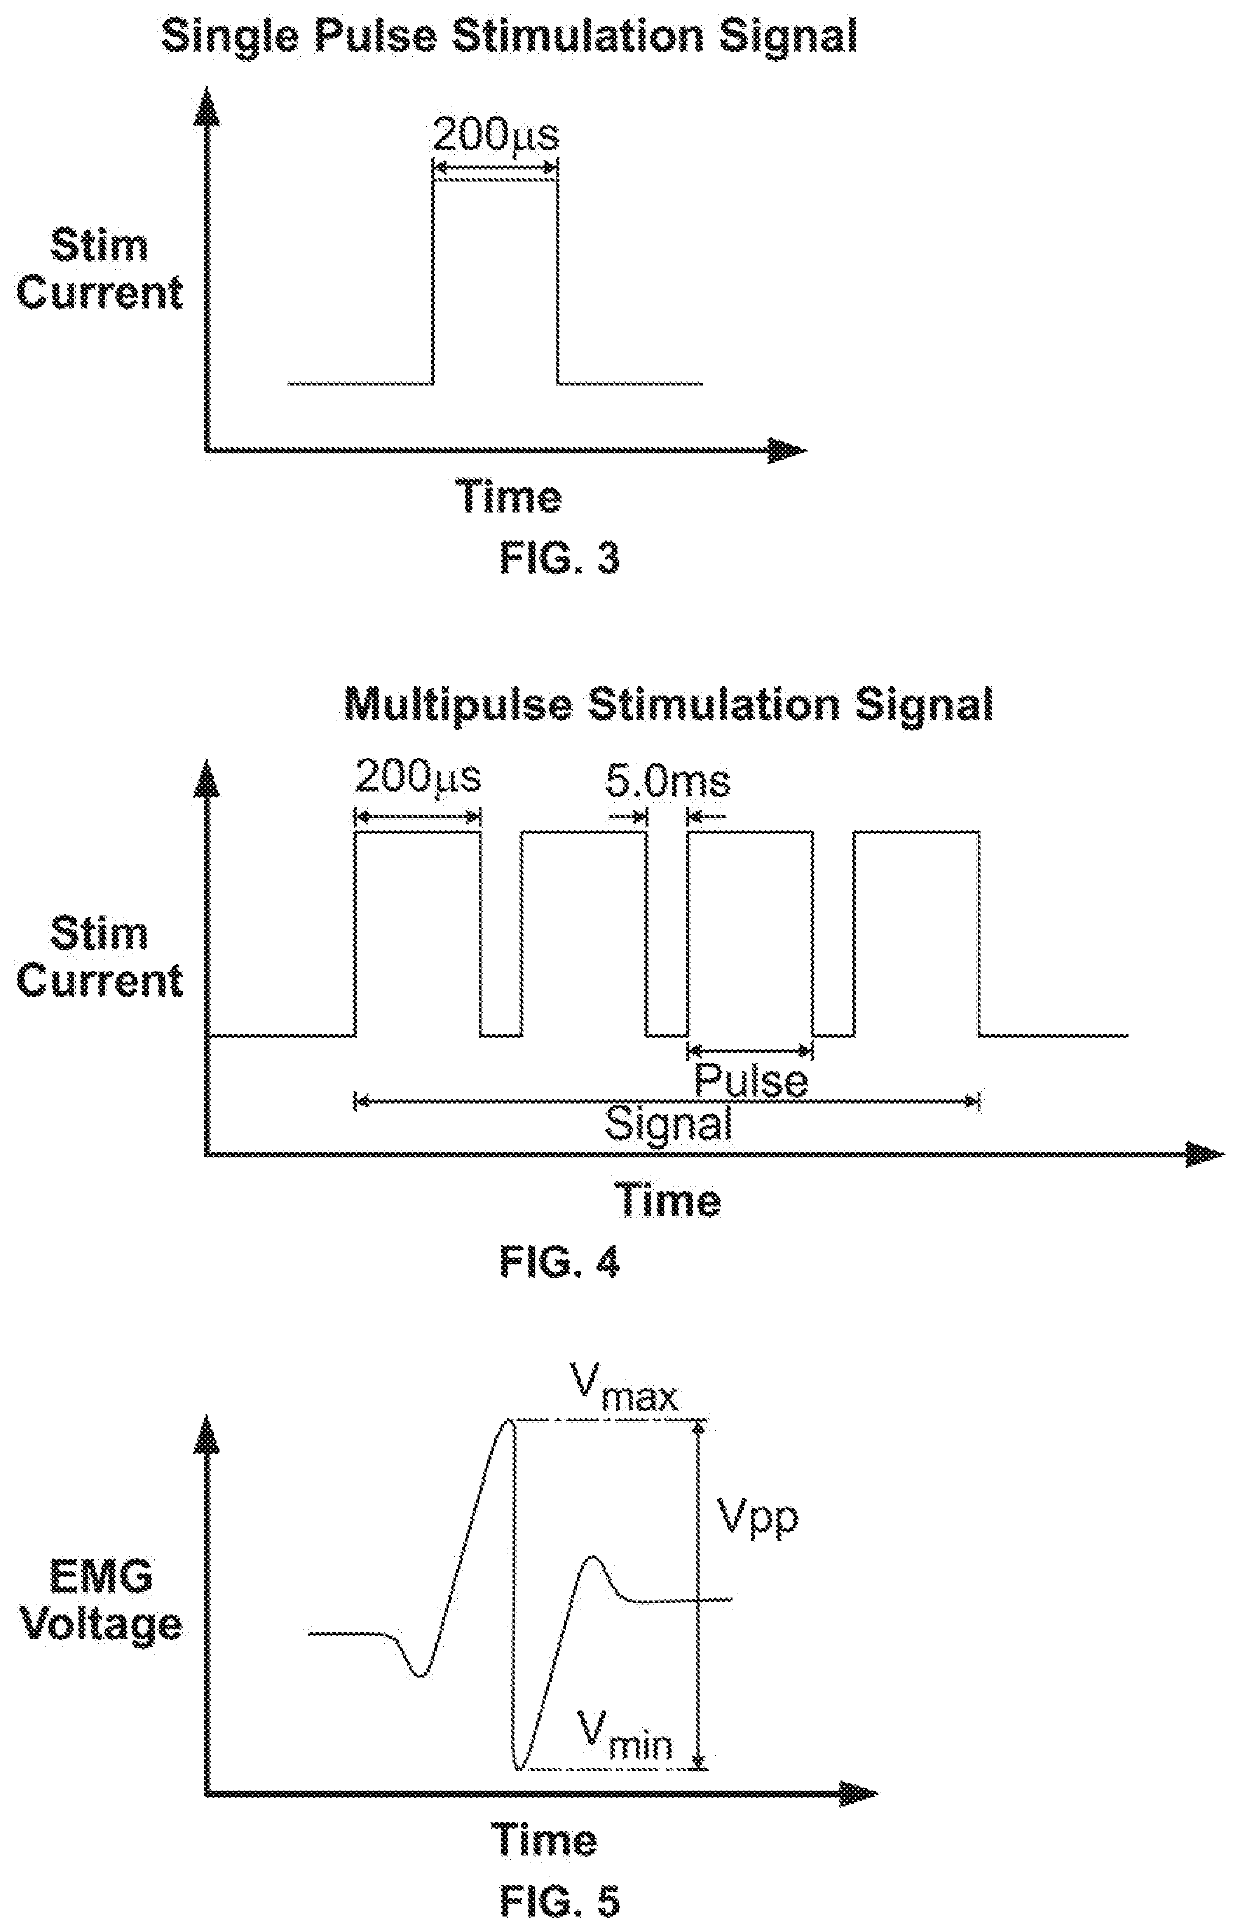 Systems and Methods for Performing Neurophysiologic Monitoring